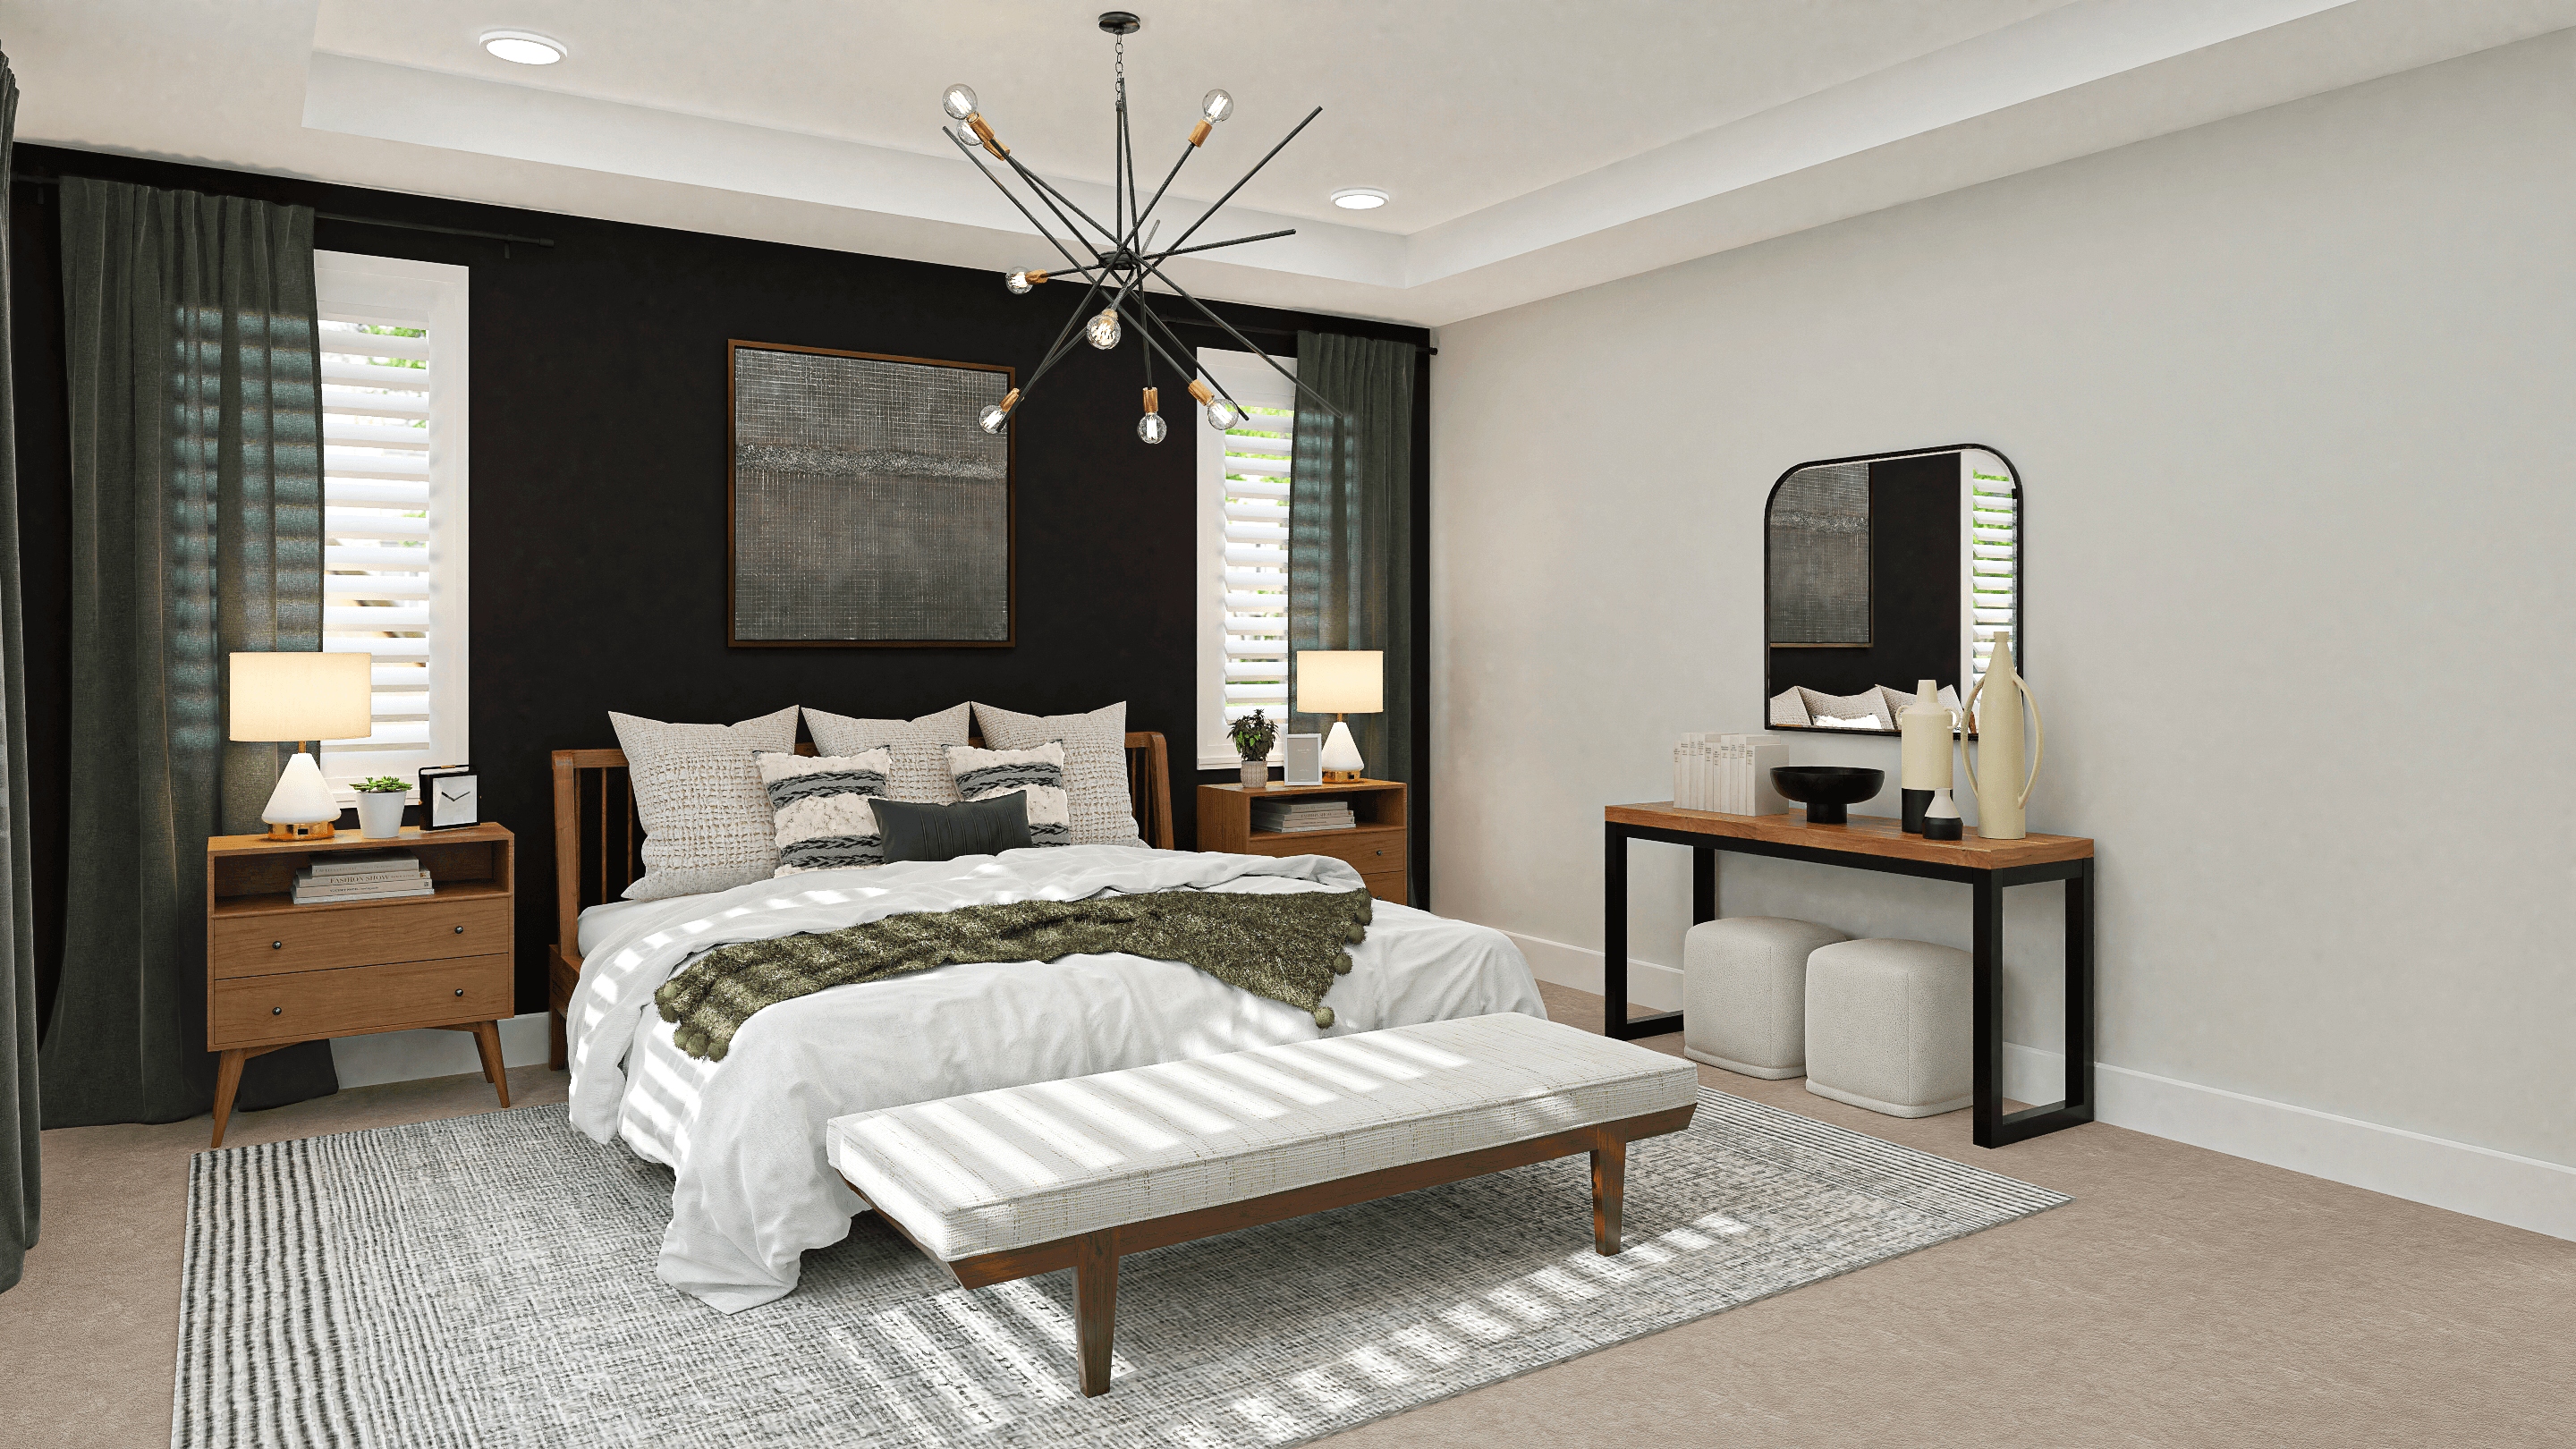 A Modern Bedroom Bursting With Mid-Century Accents